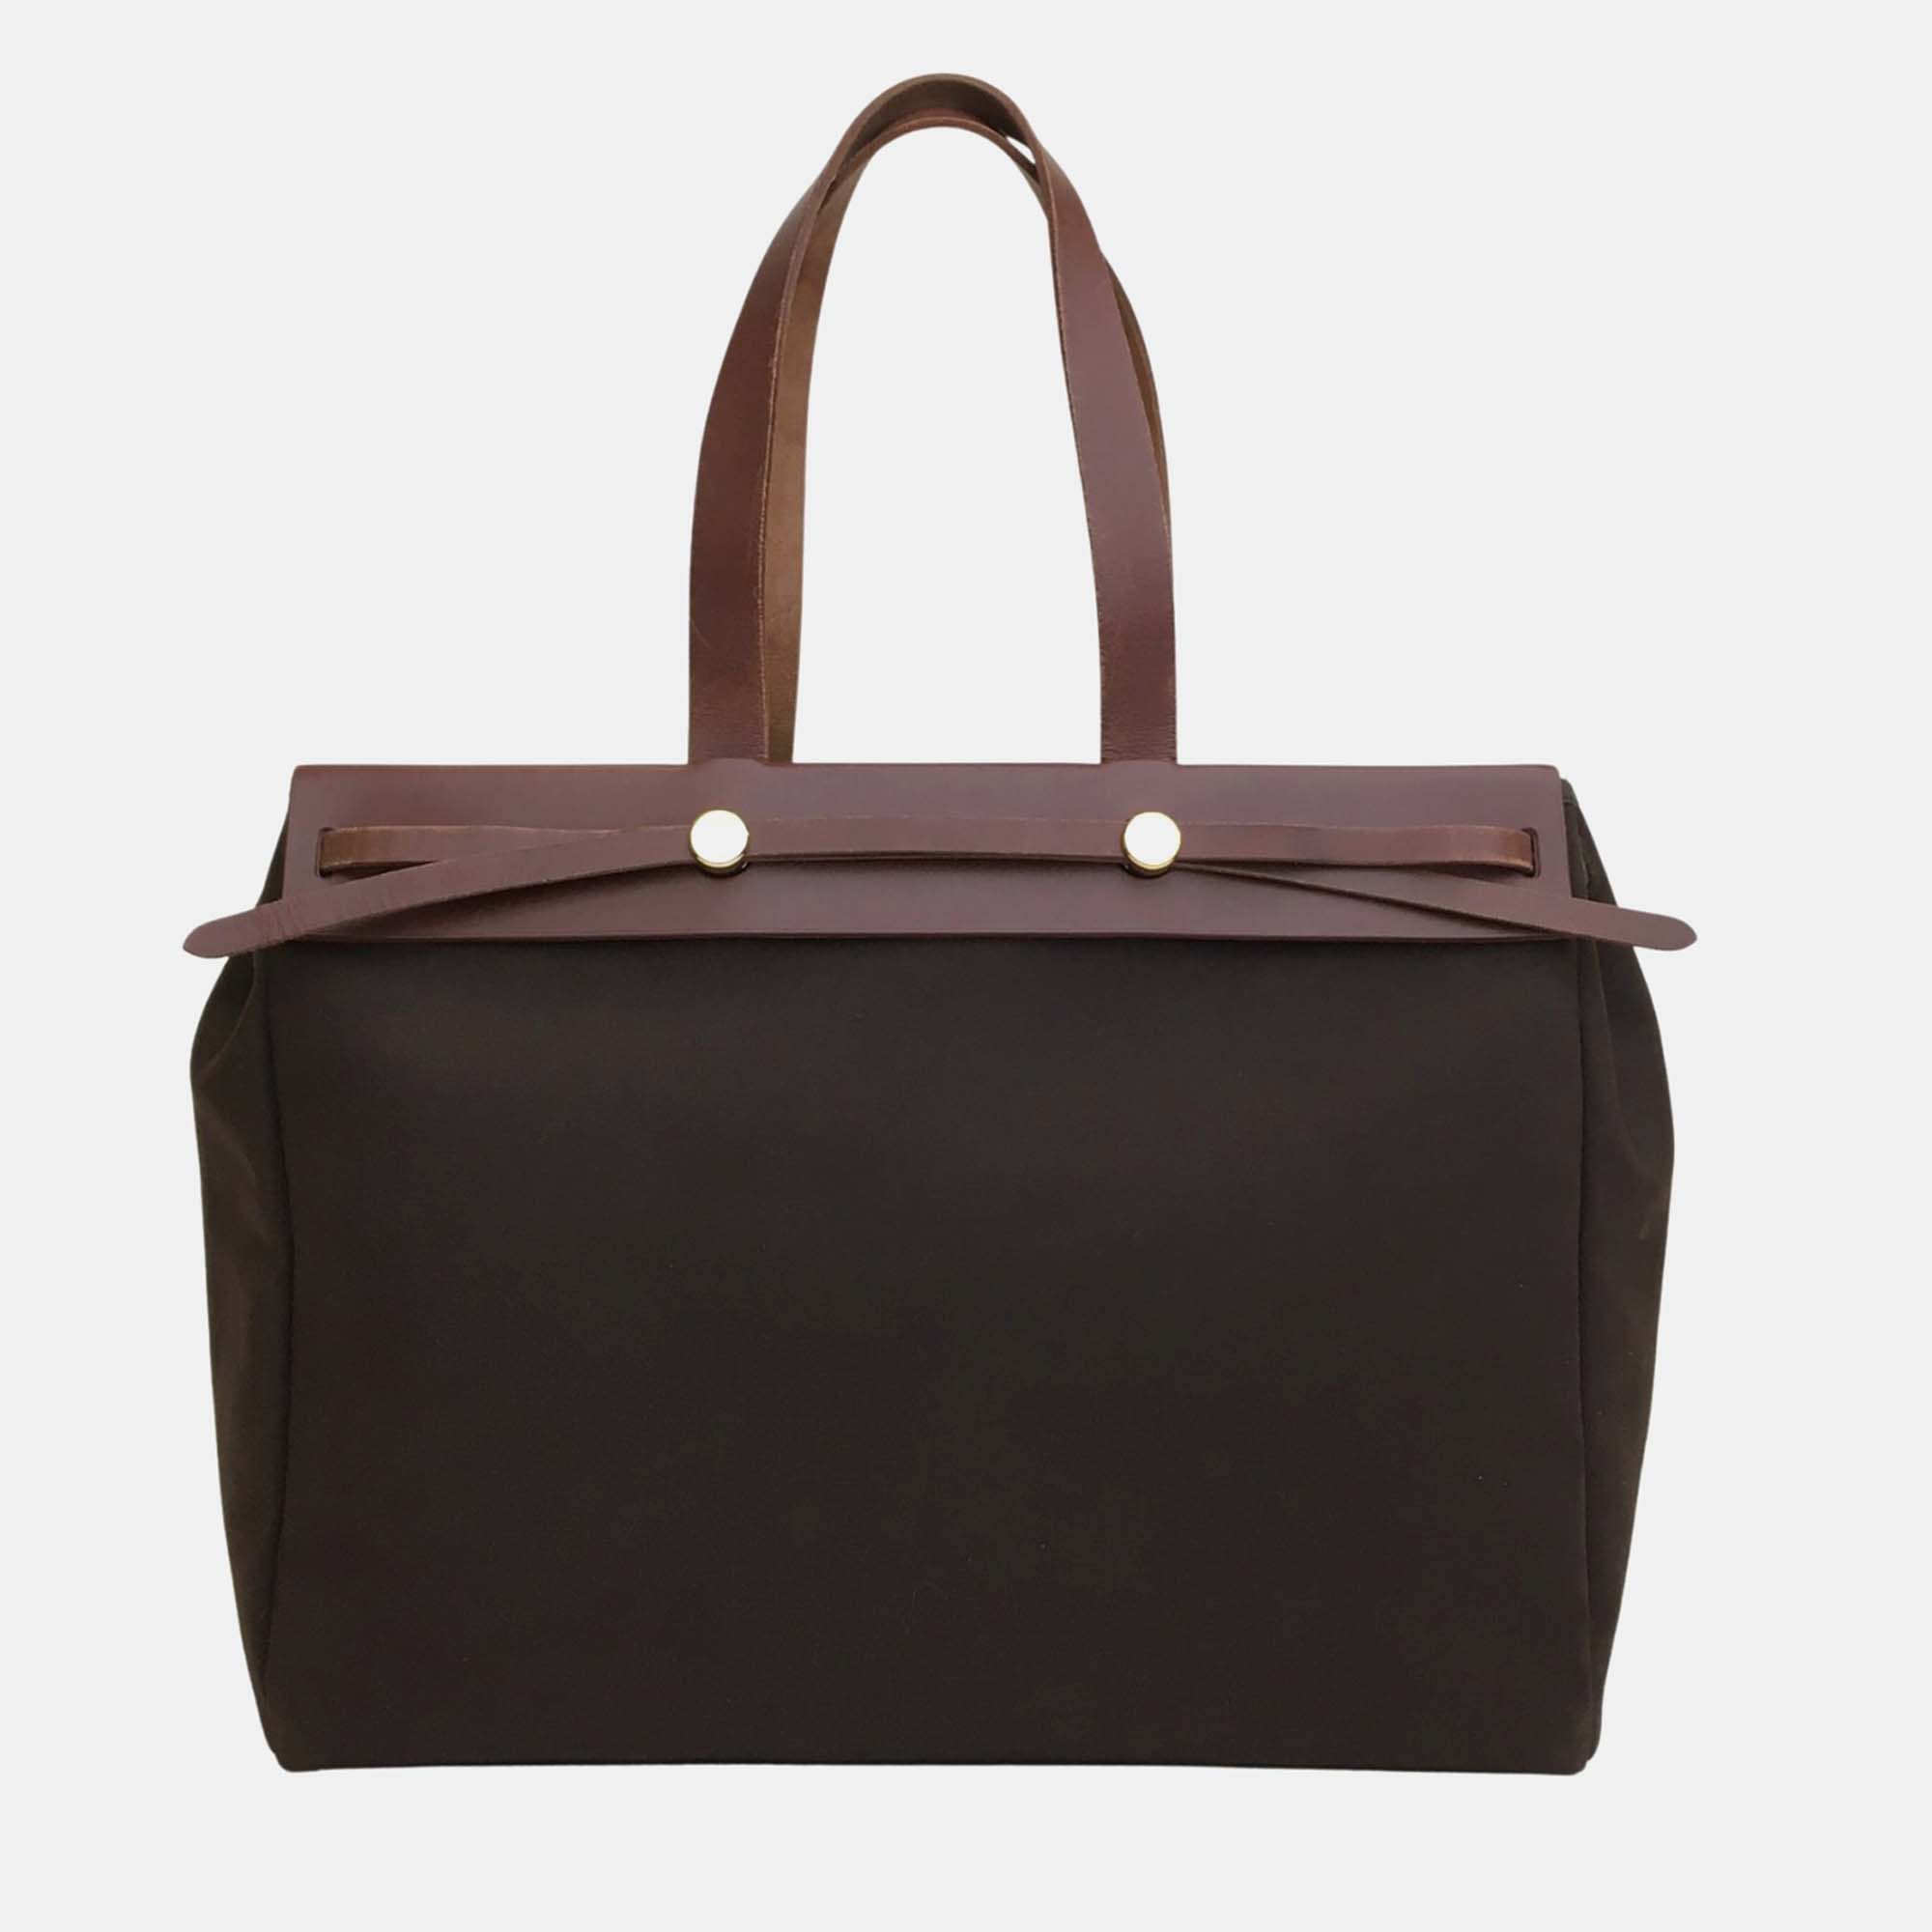 Hermes brown toile canvas and leather herbag mm top handle bag